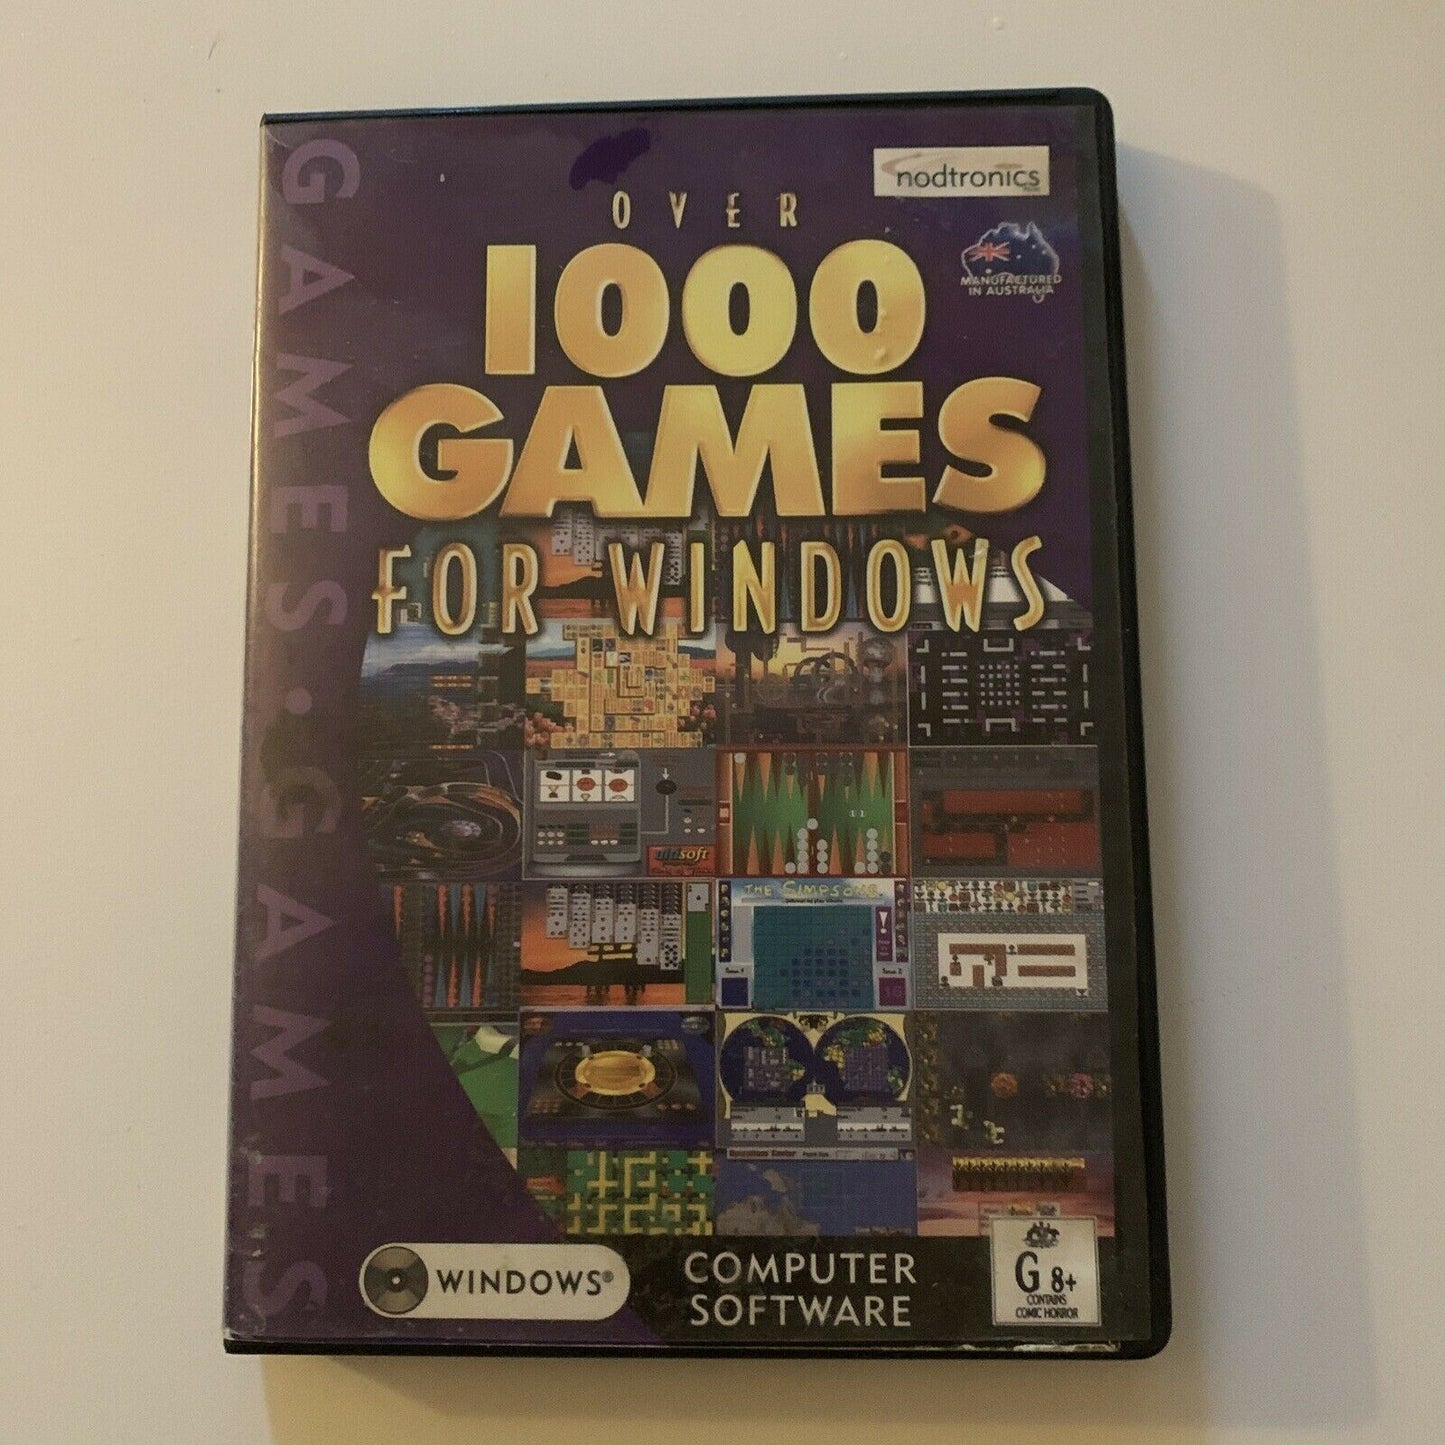 Over 1000 Games For Windows PC - CD-Rom Games - Nodtronics -